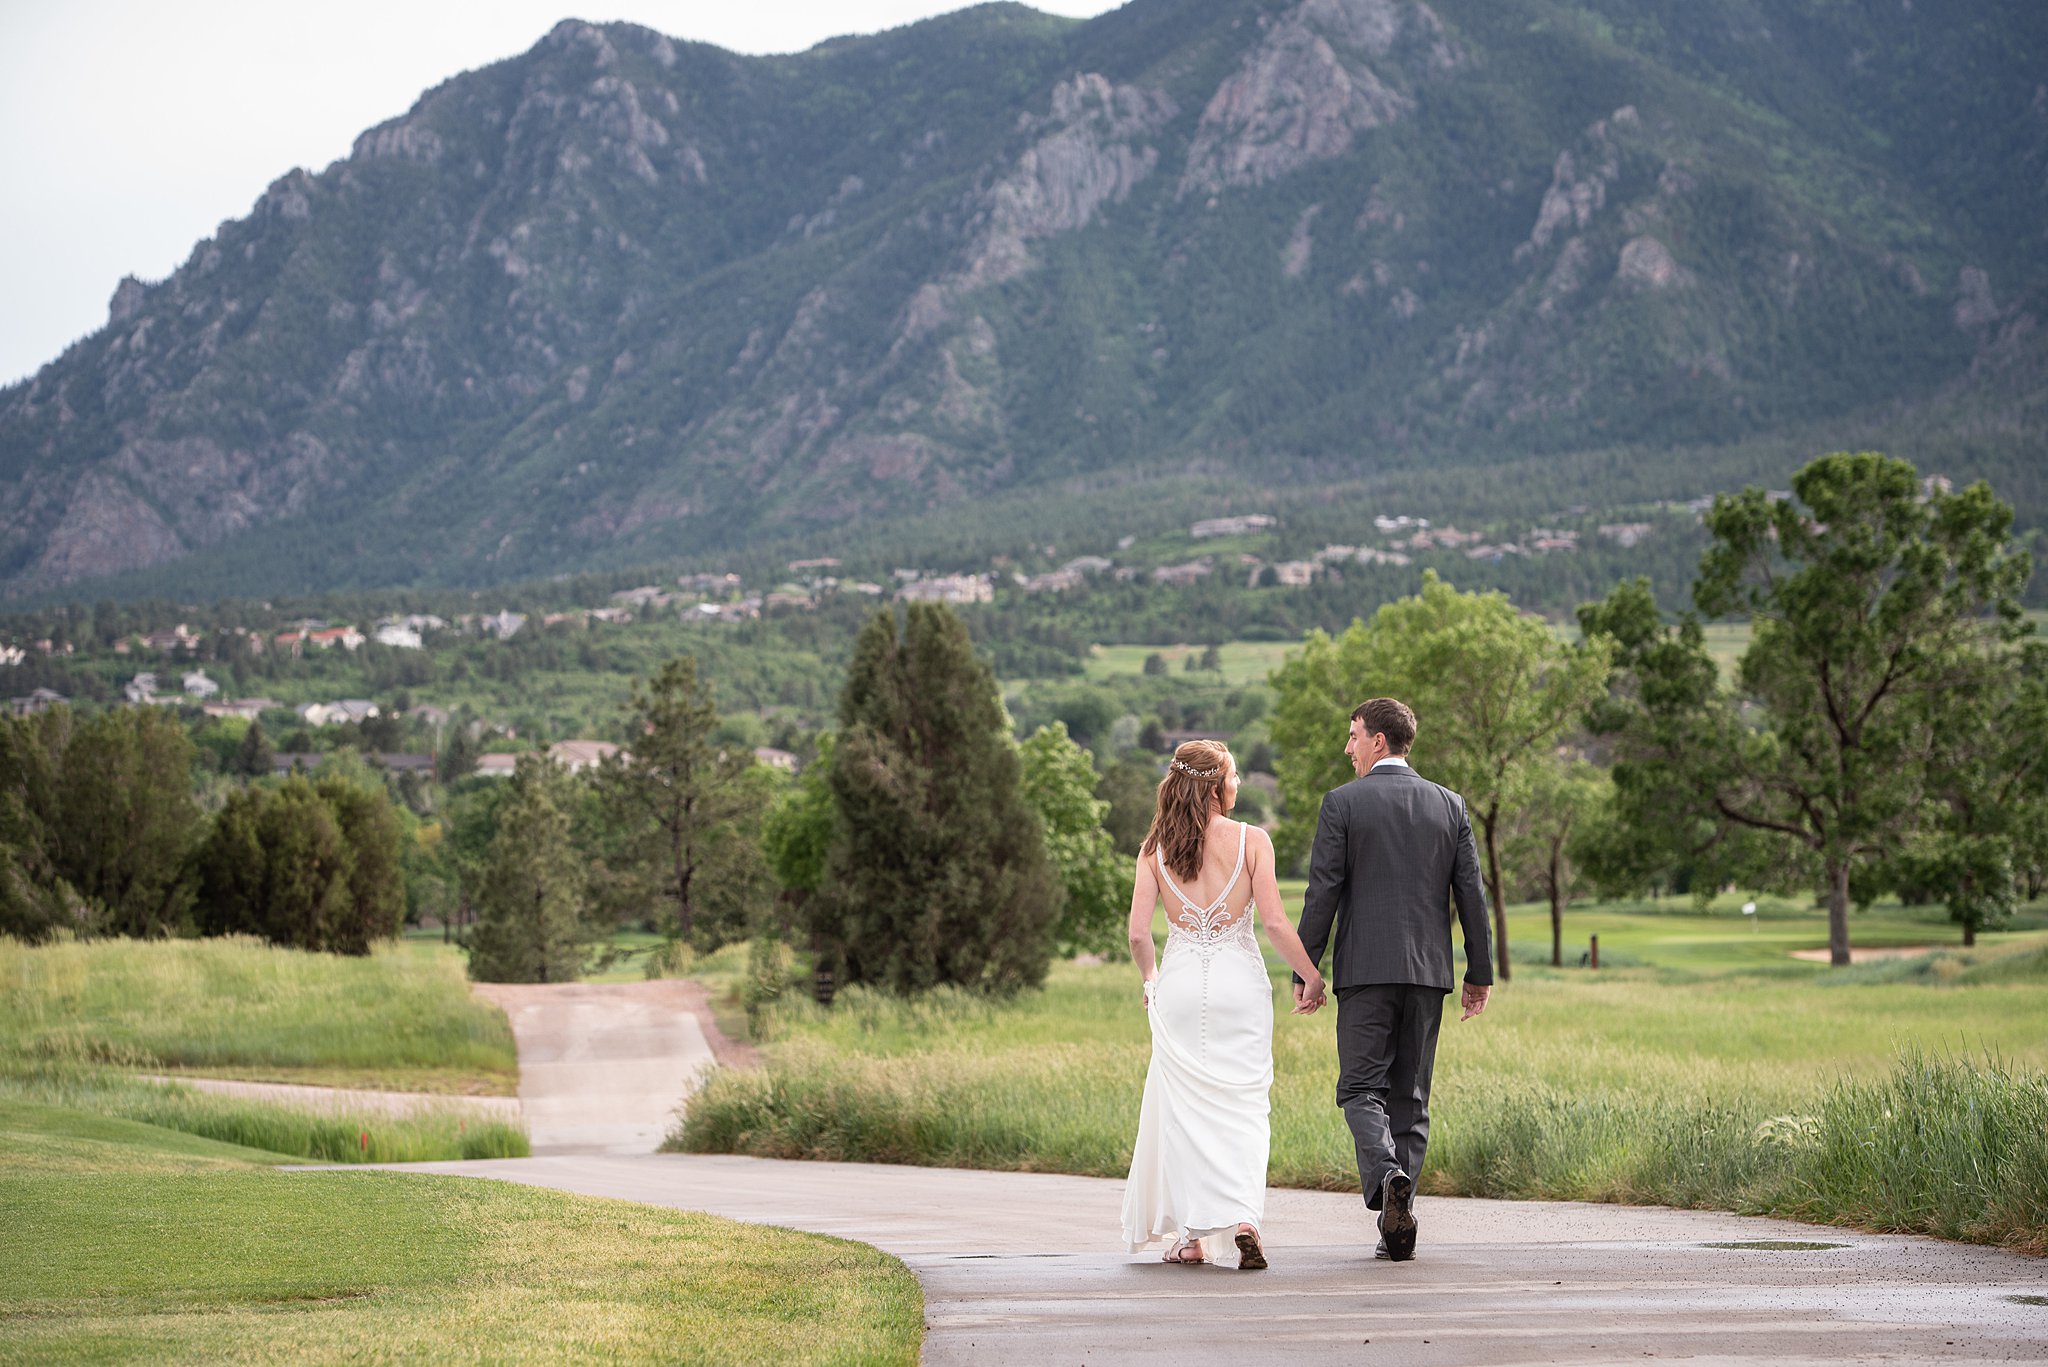 Newlyweds walk down a golf course sidewalk while holding hands